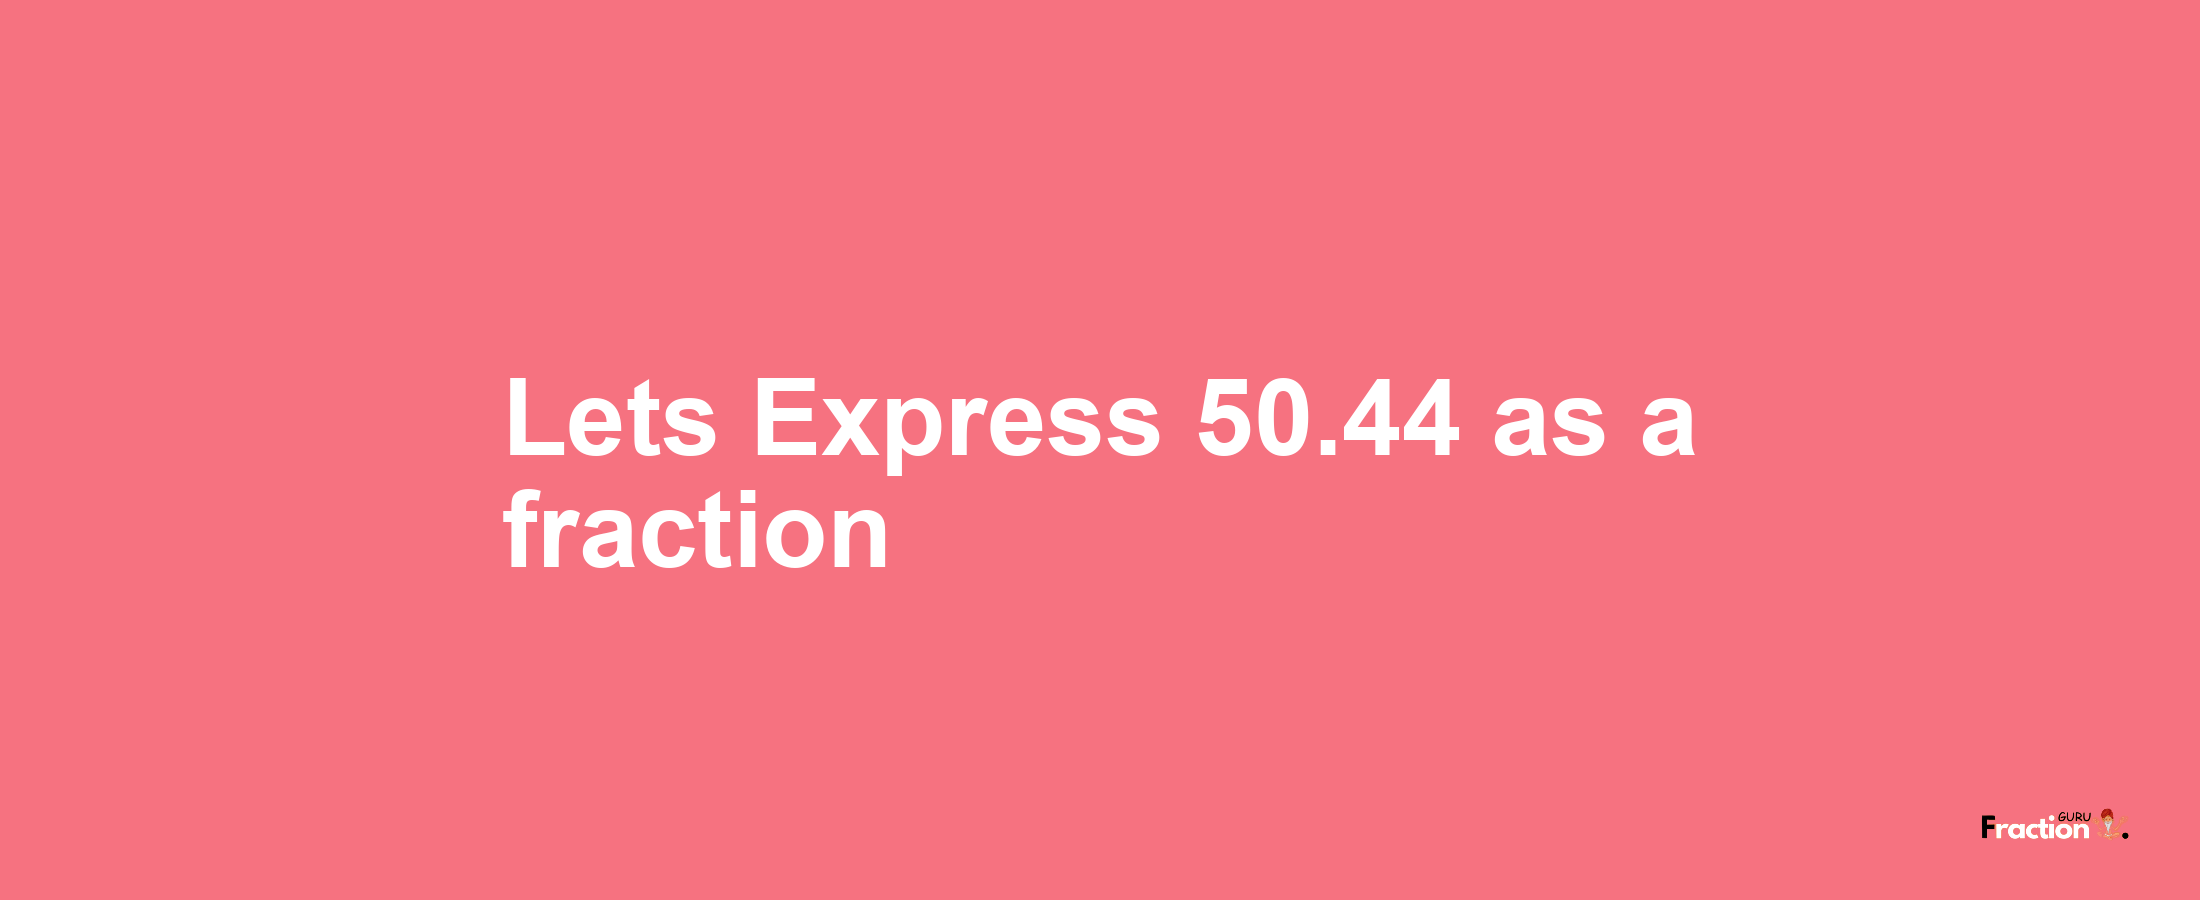 Lets Express 50.44 as afraction